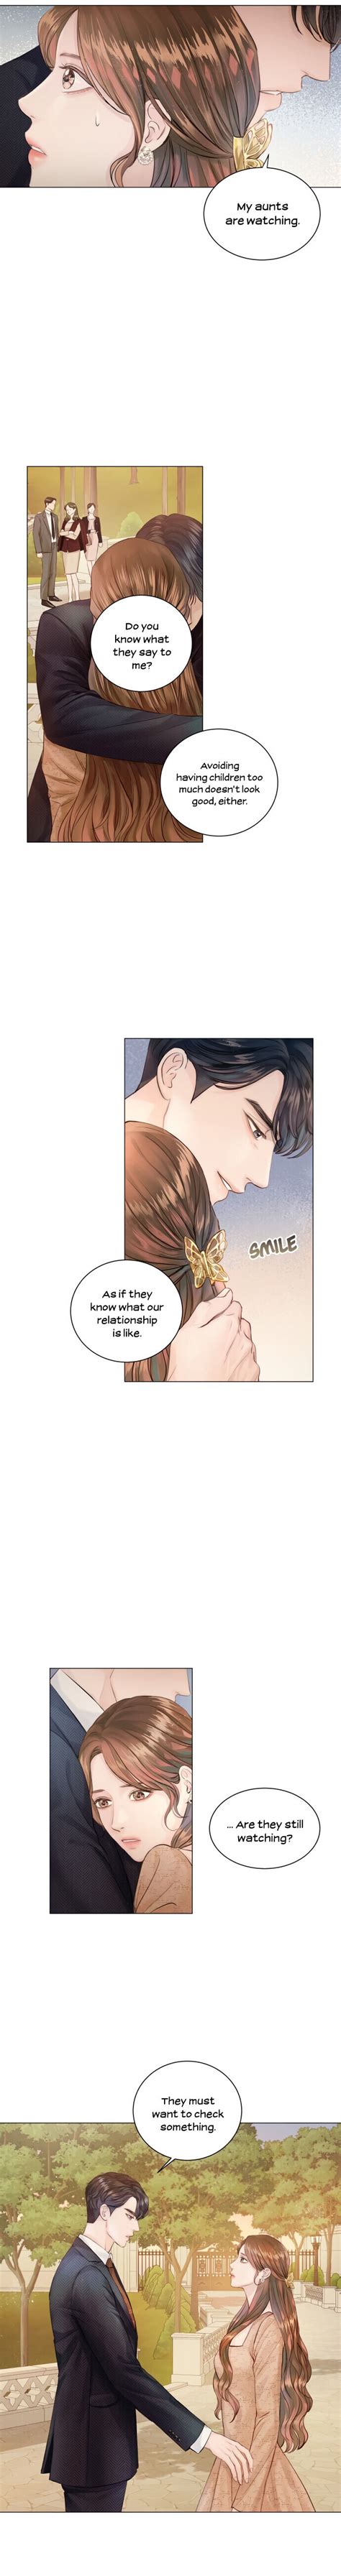 Webtoons are a digital comic format that originated in korea and has spread outside of the country. Surely a Happy Ending - Chapter 1 - 1ST KISS MANHUA